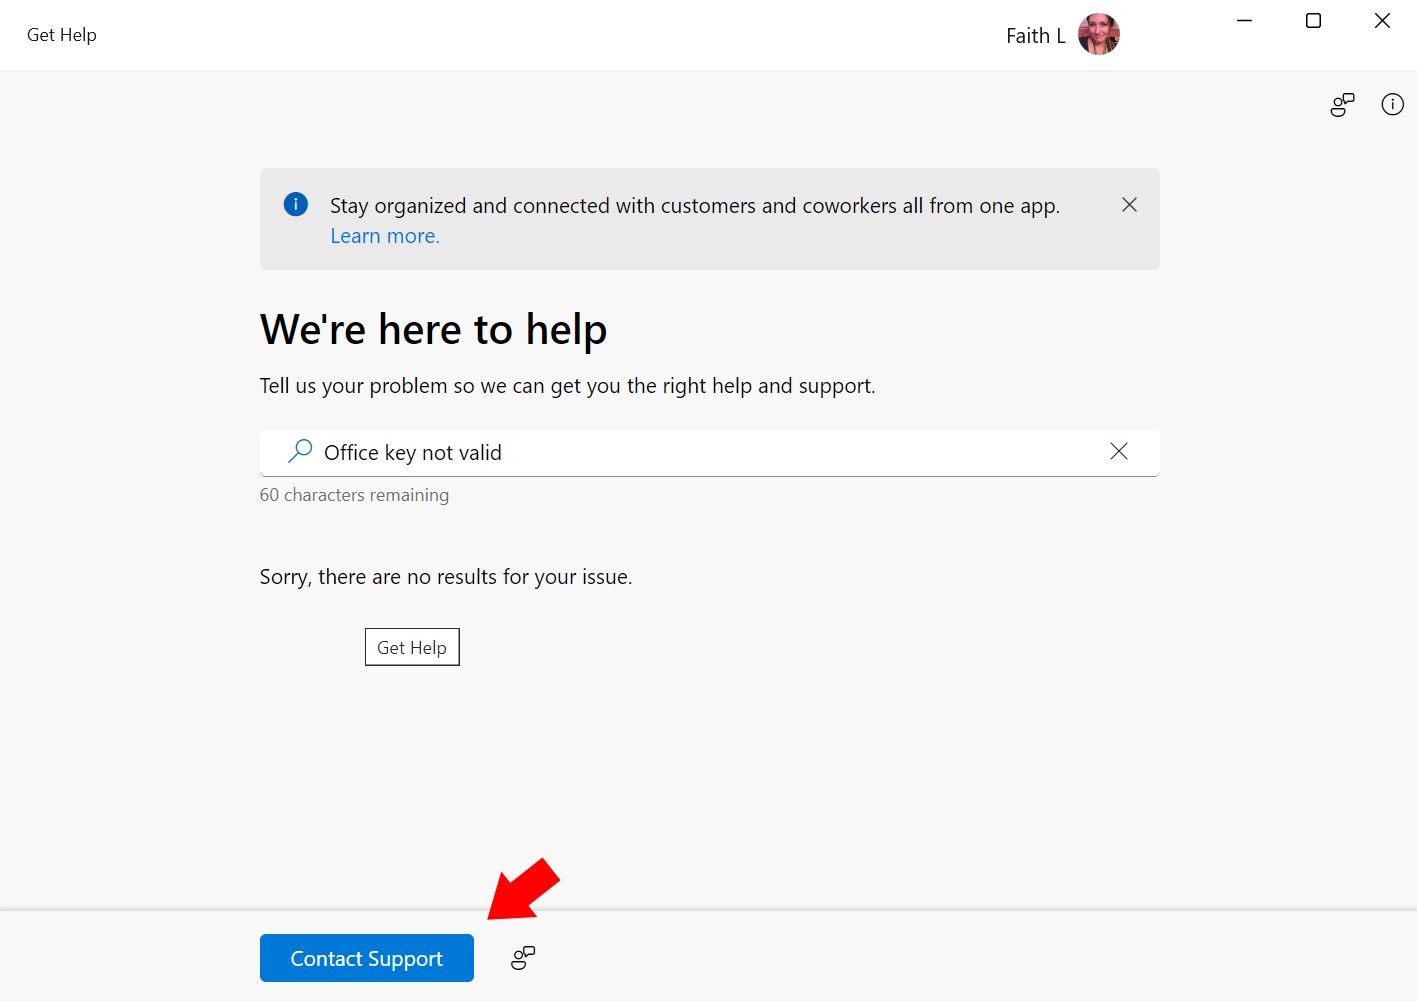 red solid arrow pointing to contact support button in get help windows app